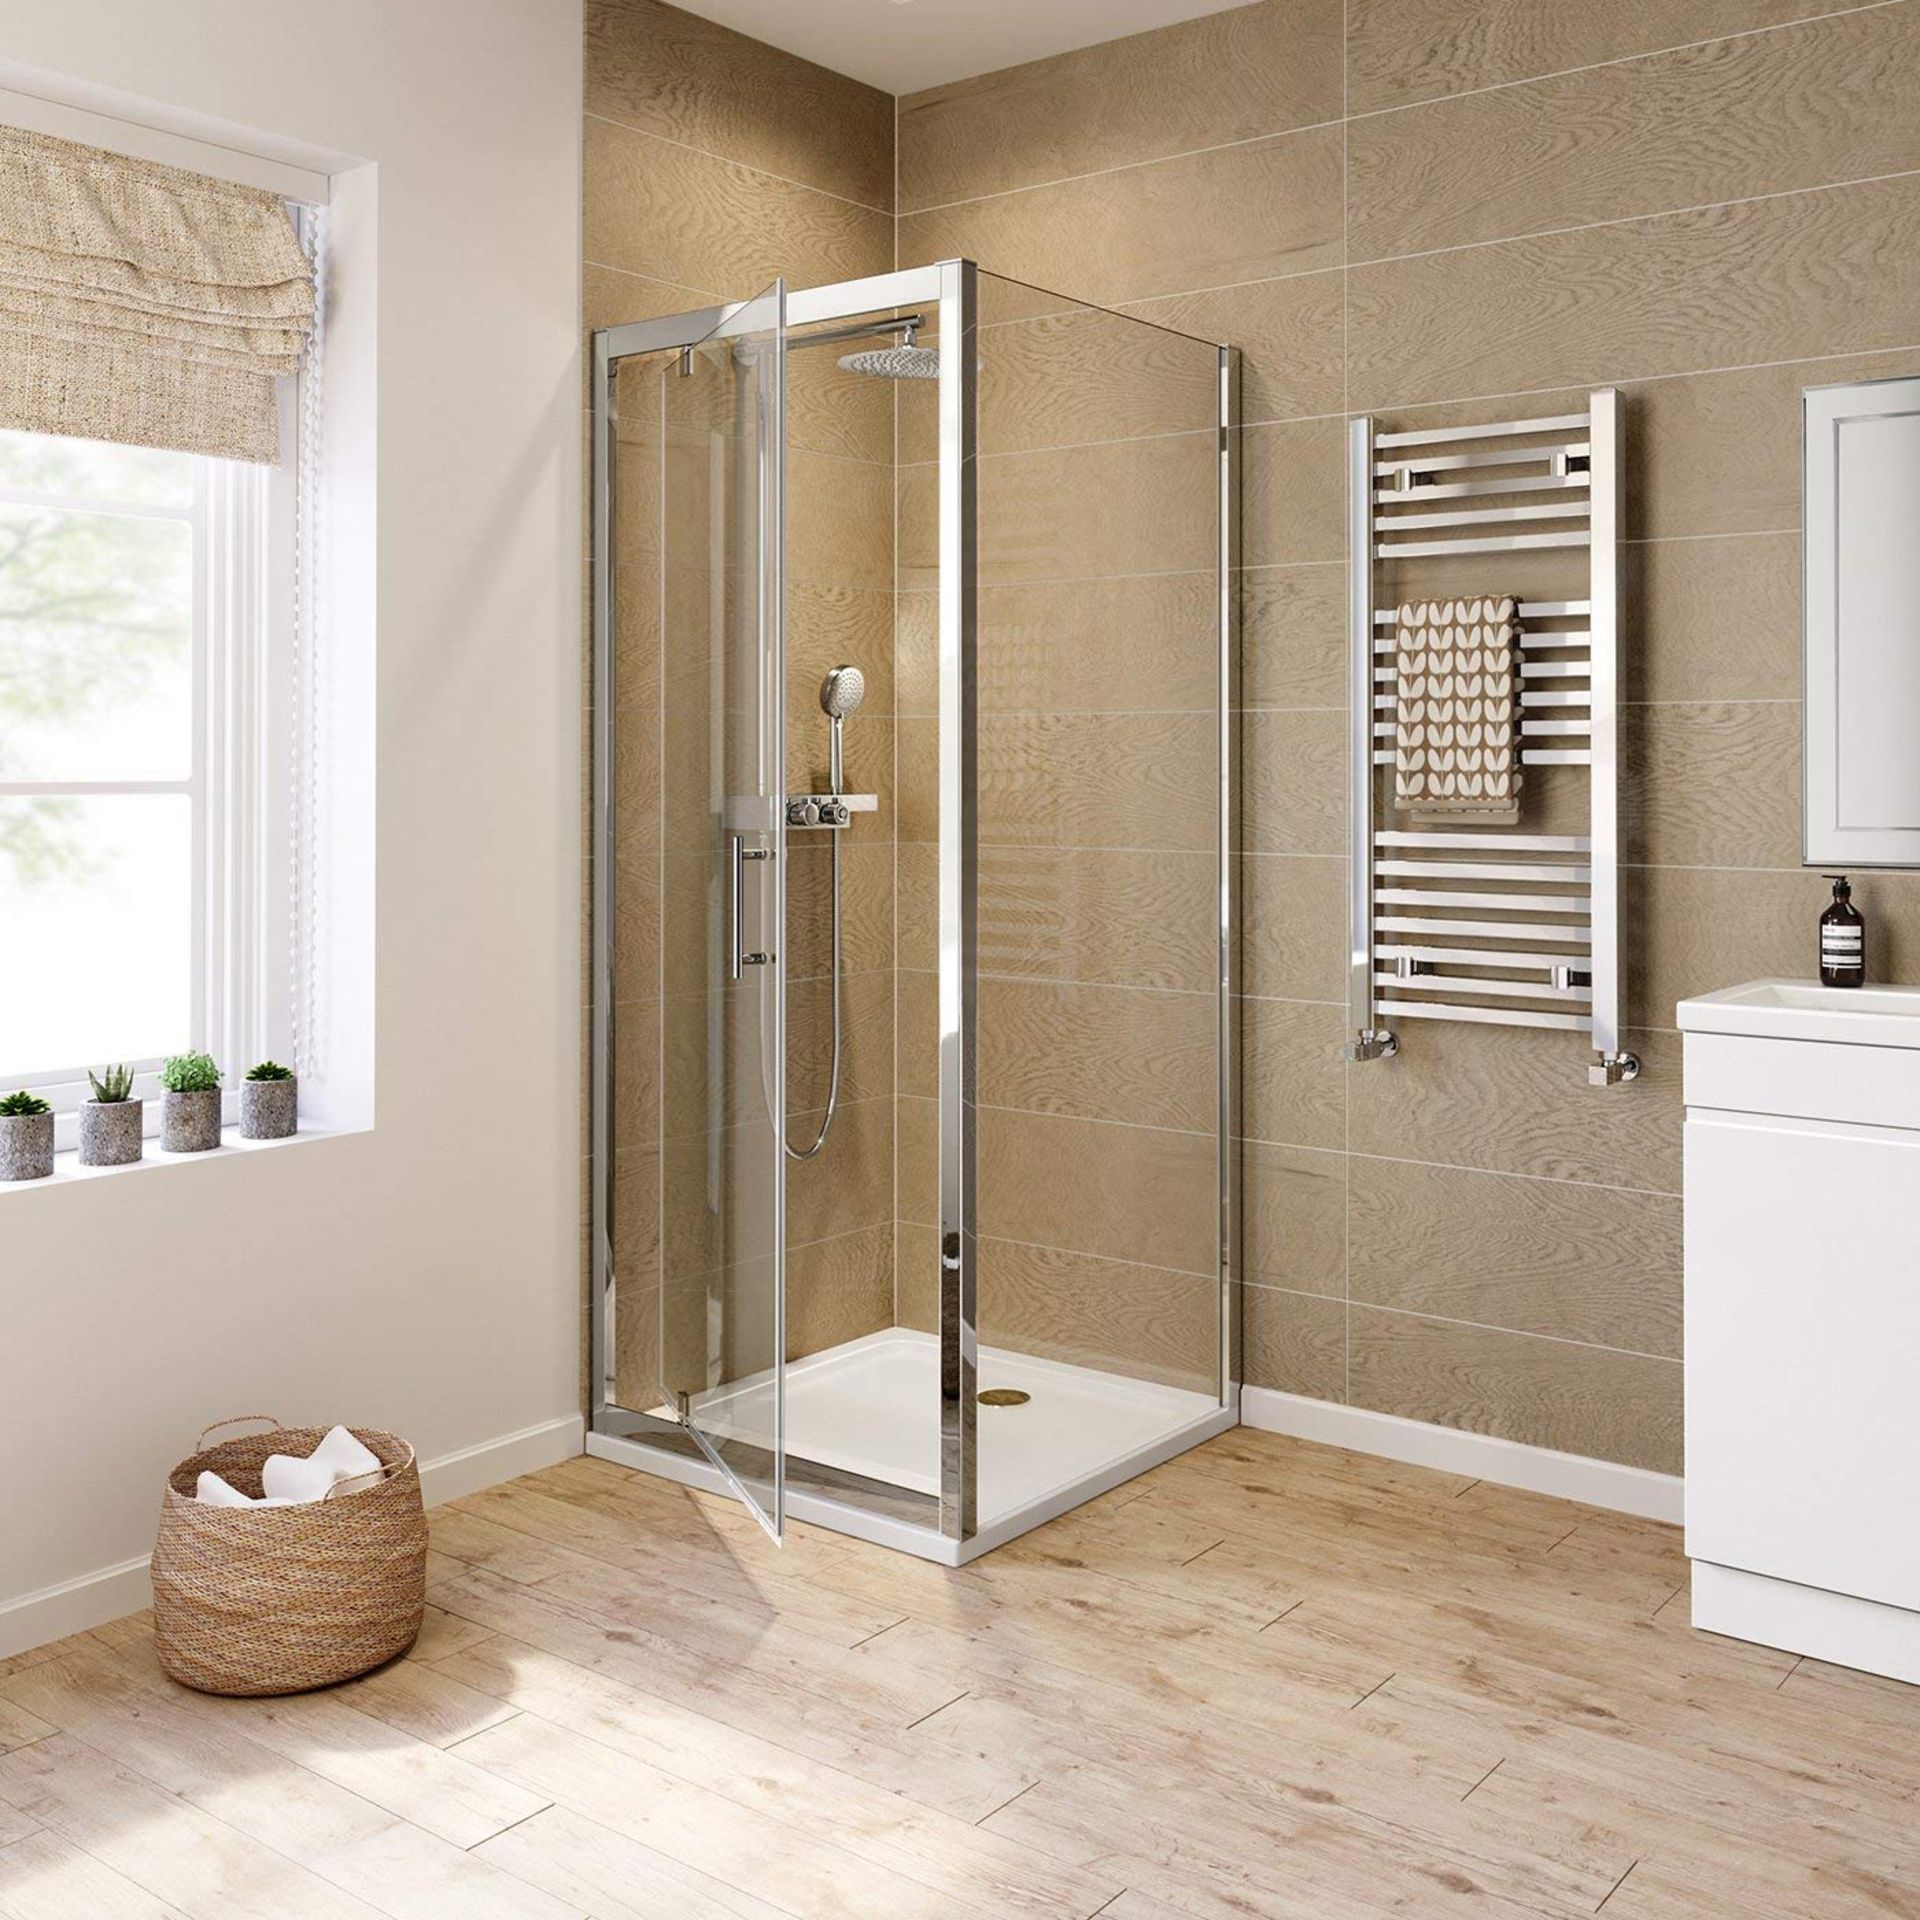 Twyfords 700x700 Pivot Hinged 8mm Glass Shower Enclosure Reversible Door + Side Panel. RRP £34... - Image 3 of 4